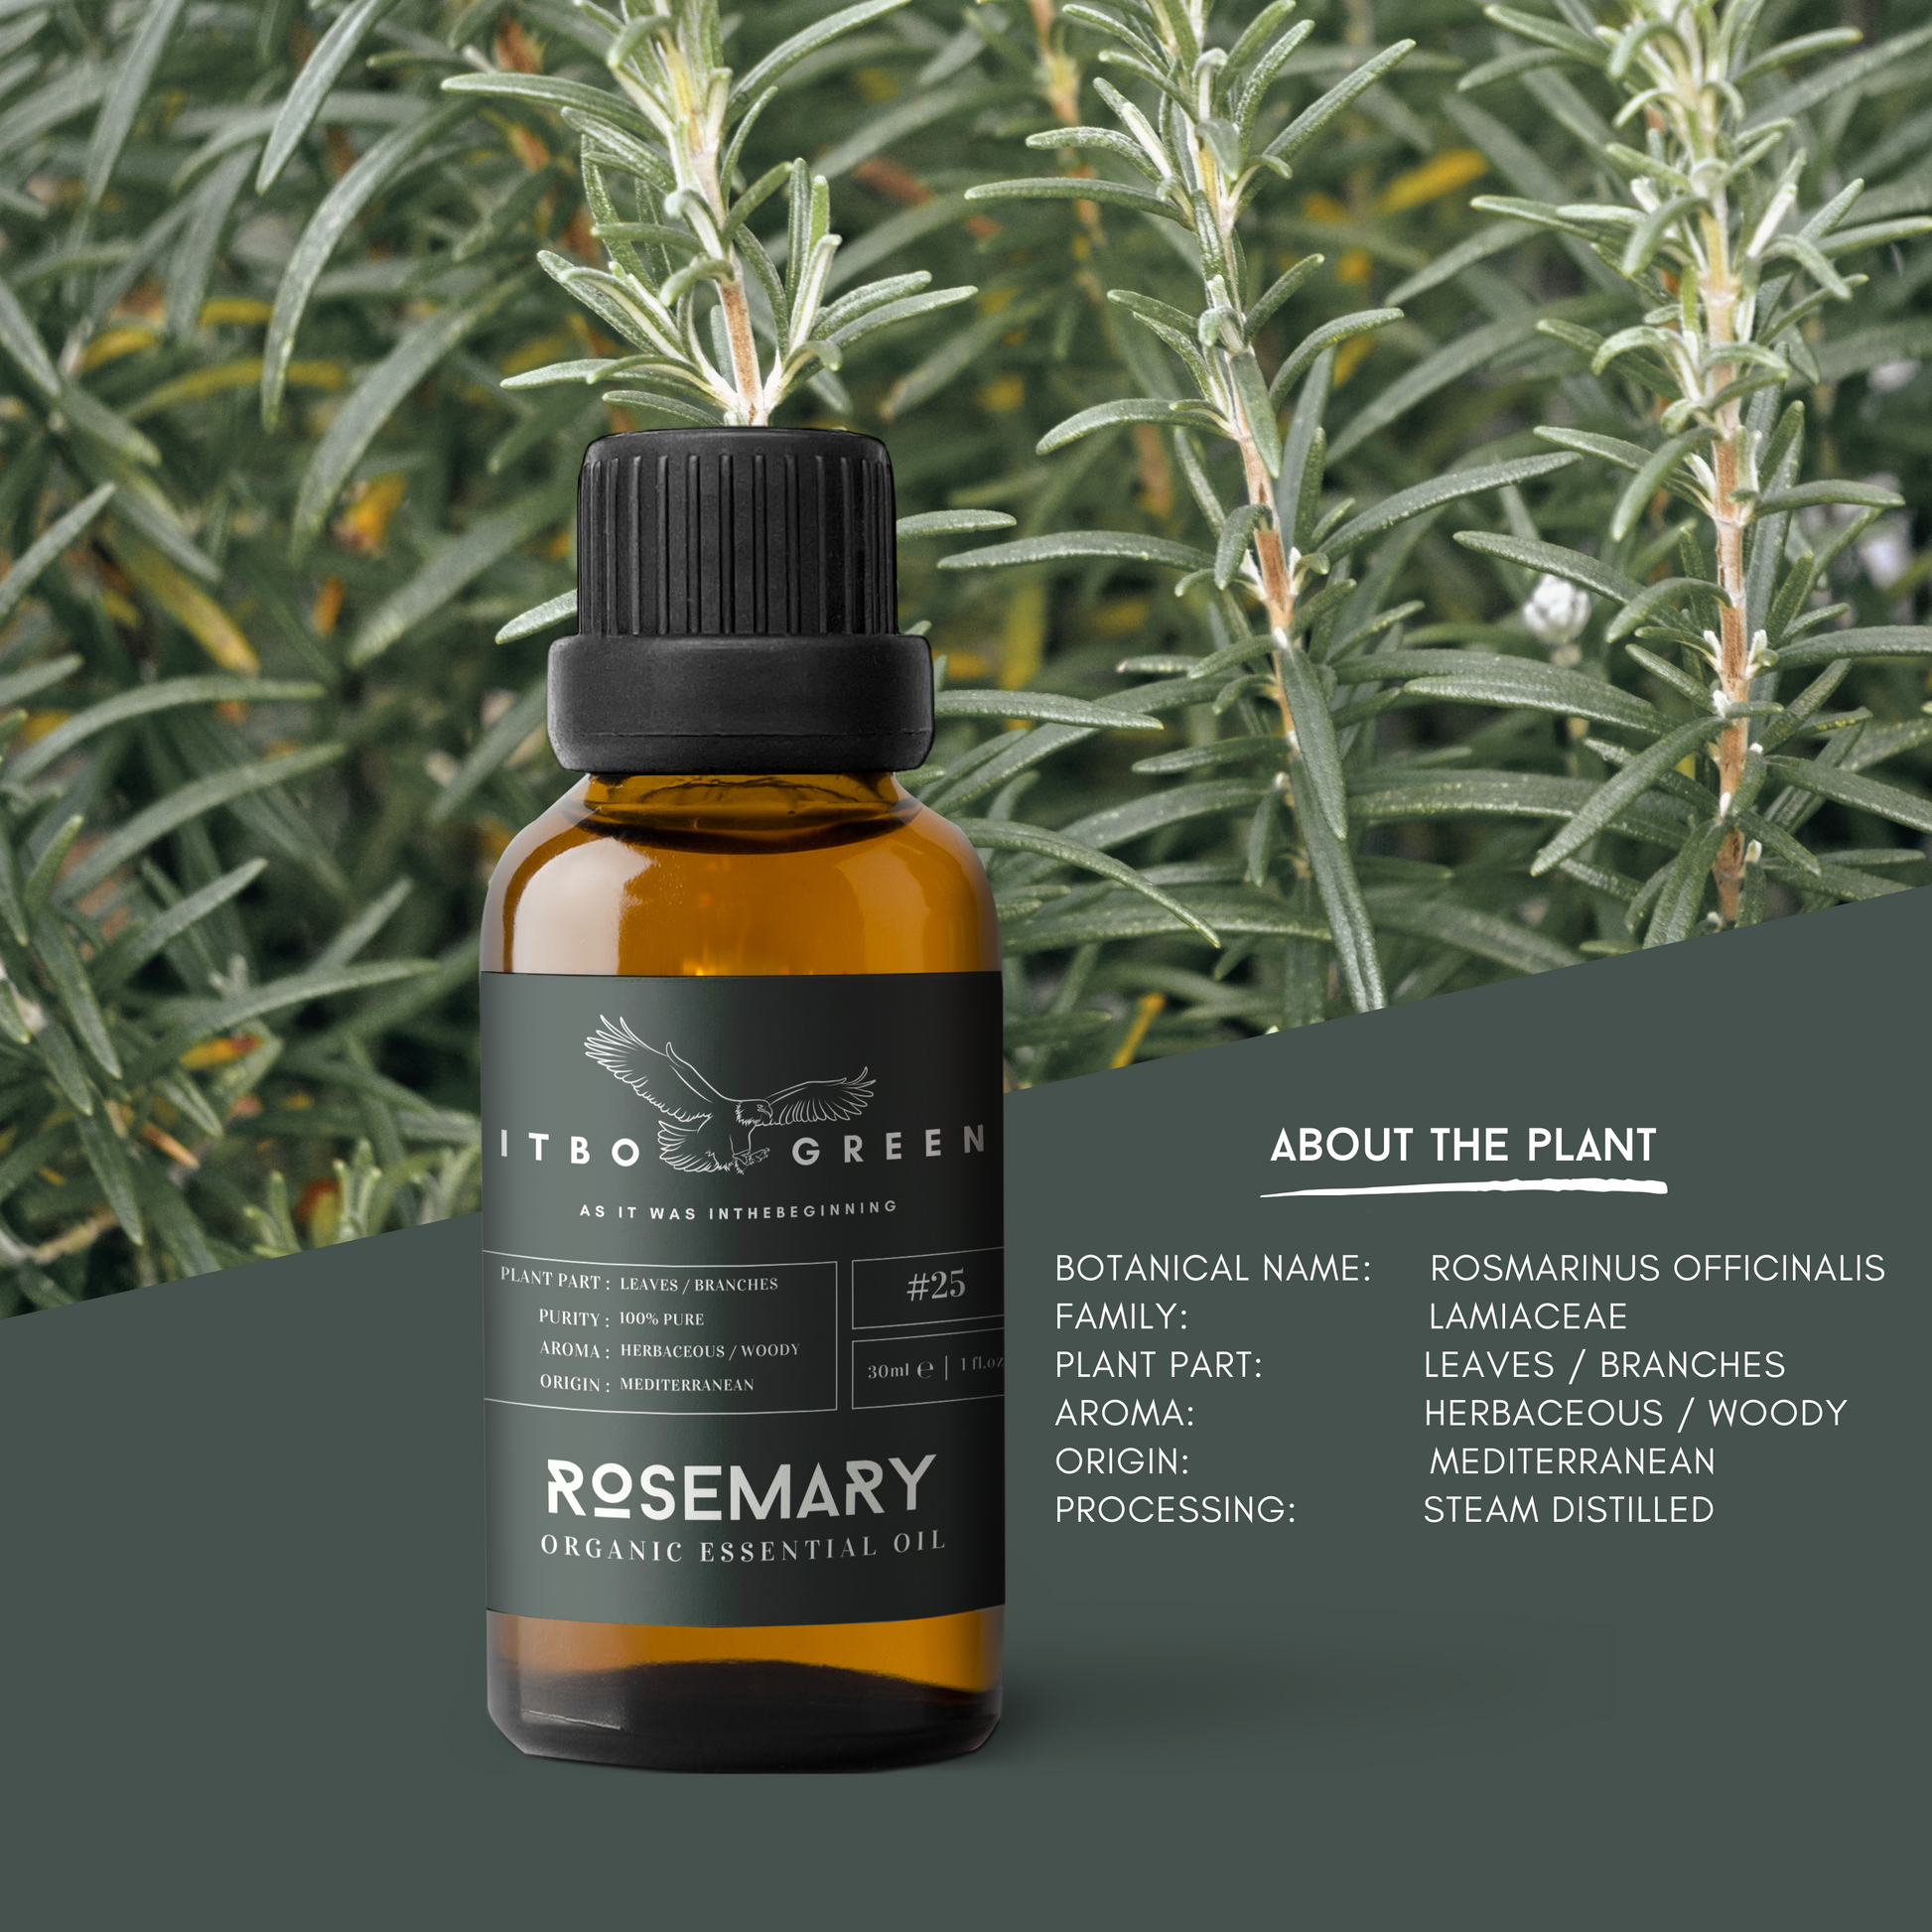 Organic Rosemary (Morocco) Essential Oil | 30ml / 1oz UV Bottle | Pure Herbaceous Oil | Unblended | Aromatherapy | Vegan | Spirituality| Nature Heals - ITBO Green